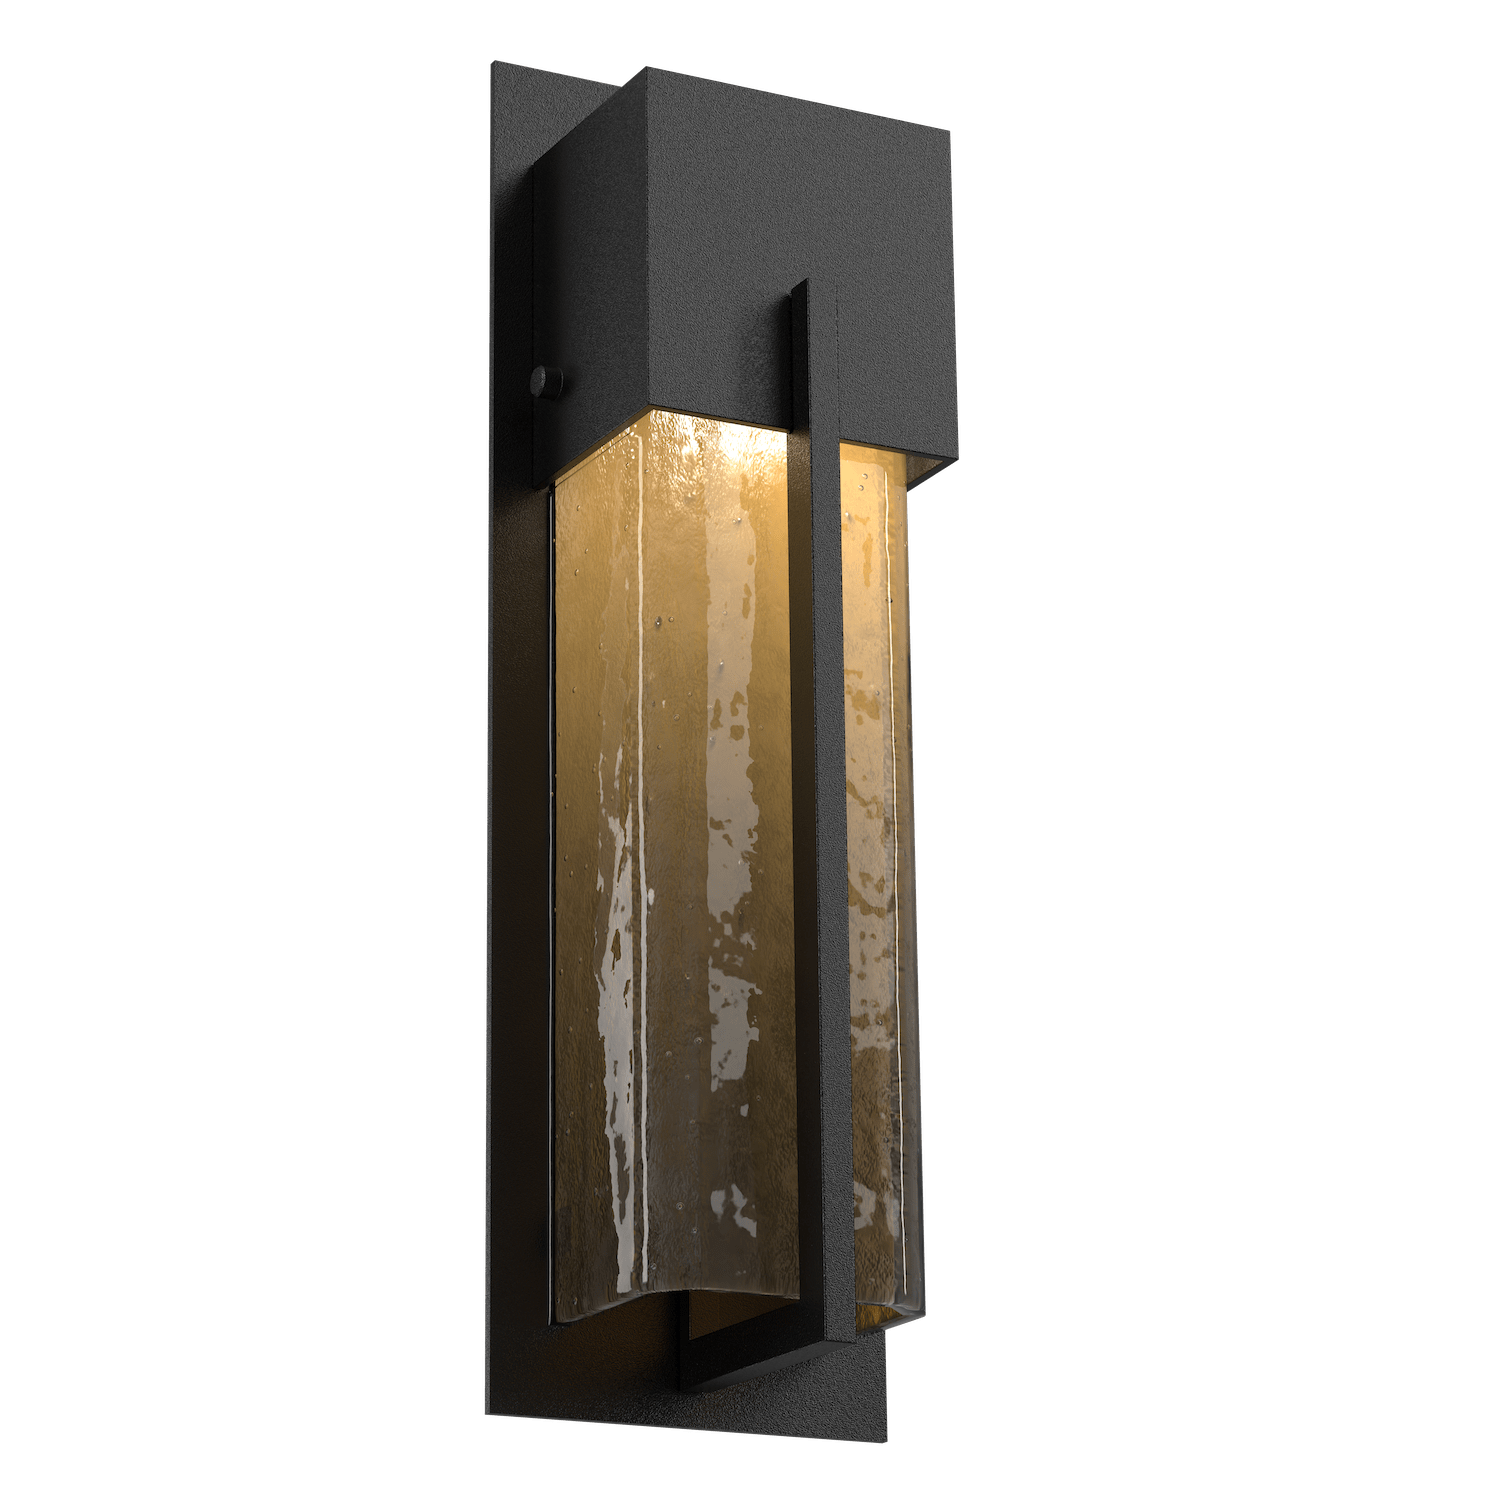 ODB0055-16-TB-BG-Hammerton-Studio-16-inch-outdoor-sconce-with-square-bronze-granite-glass-cover-with-textured-black-finish-and-LED-lamping